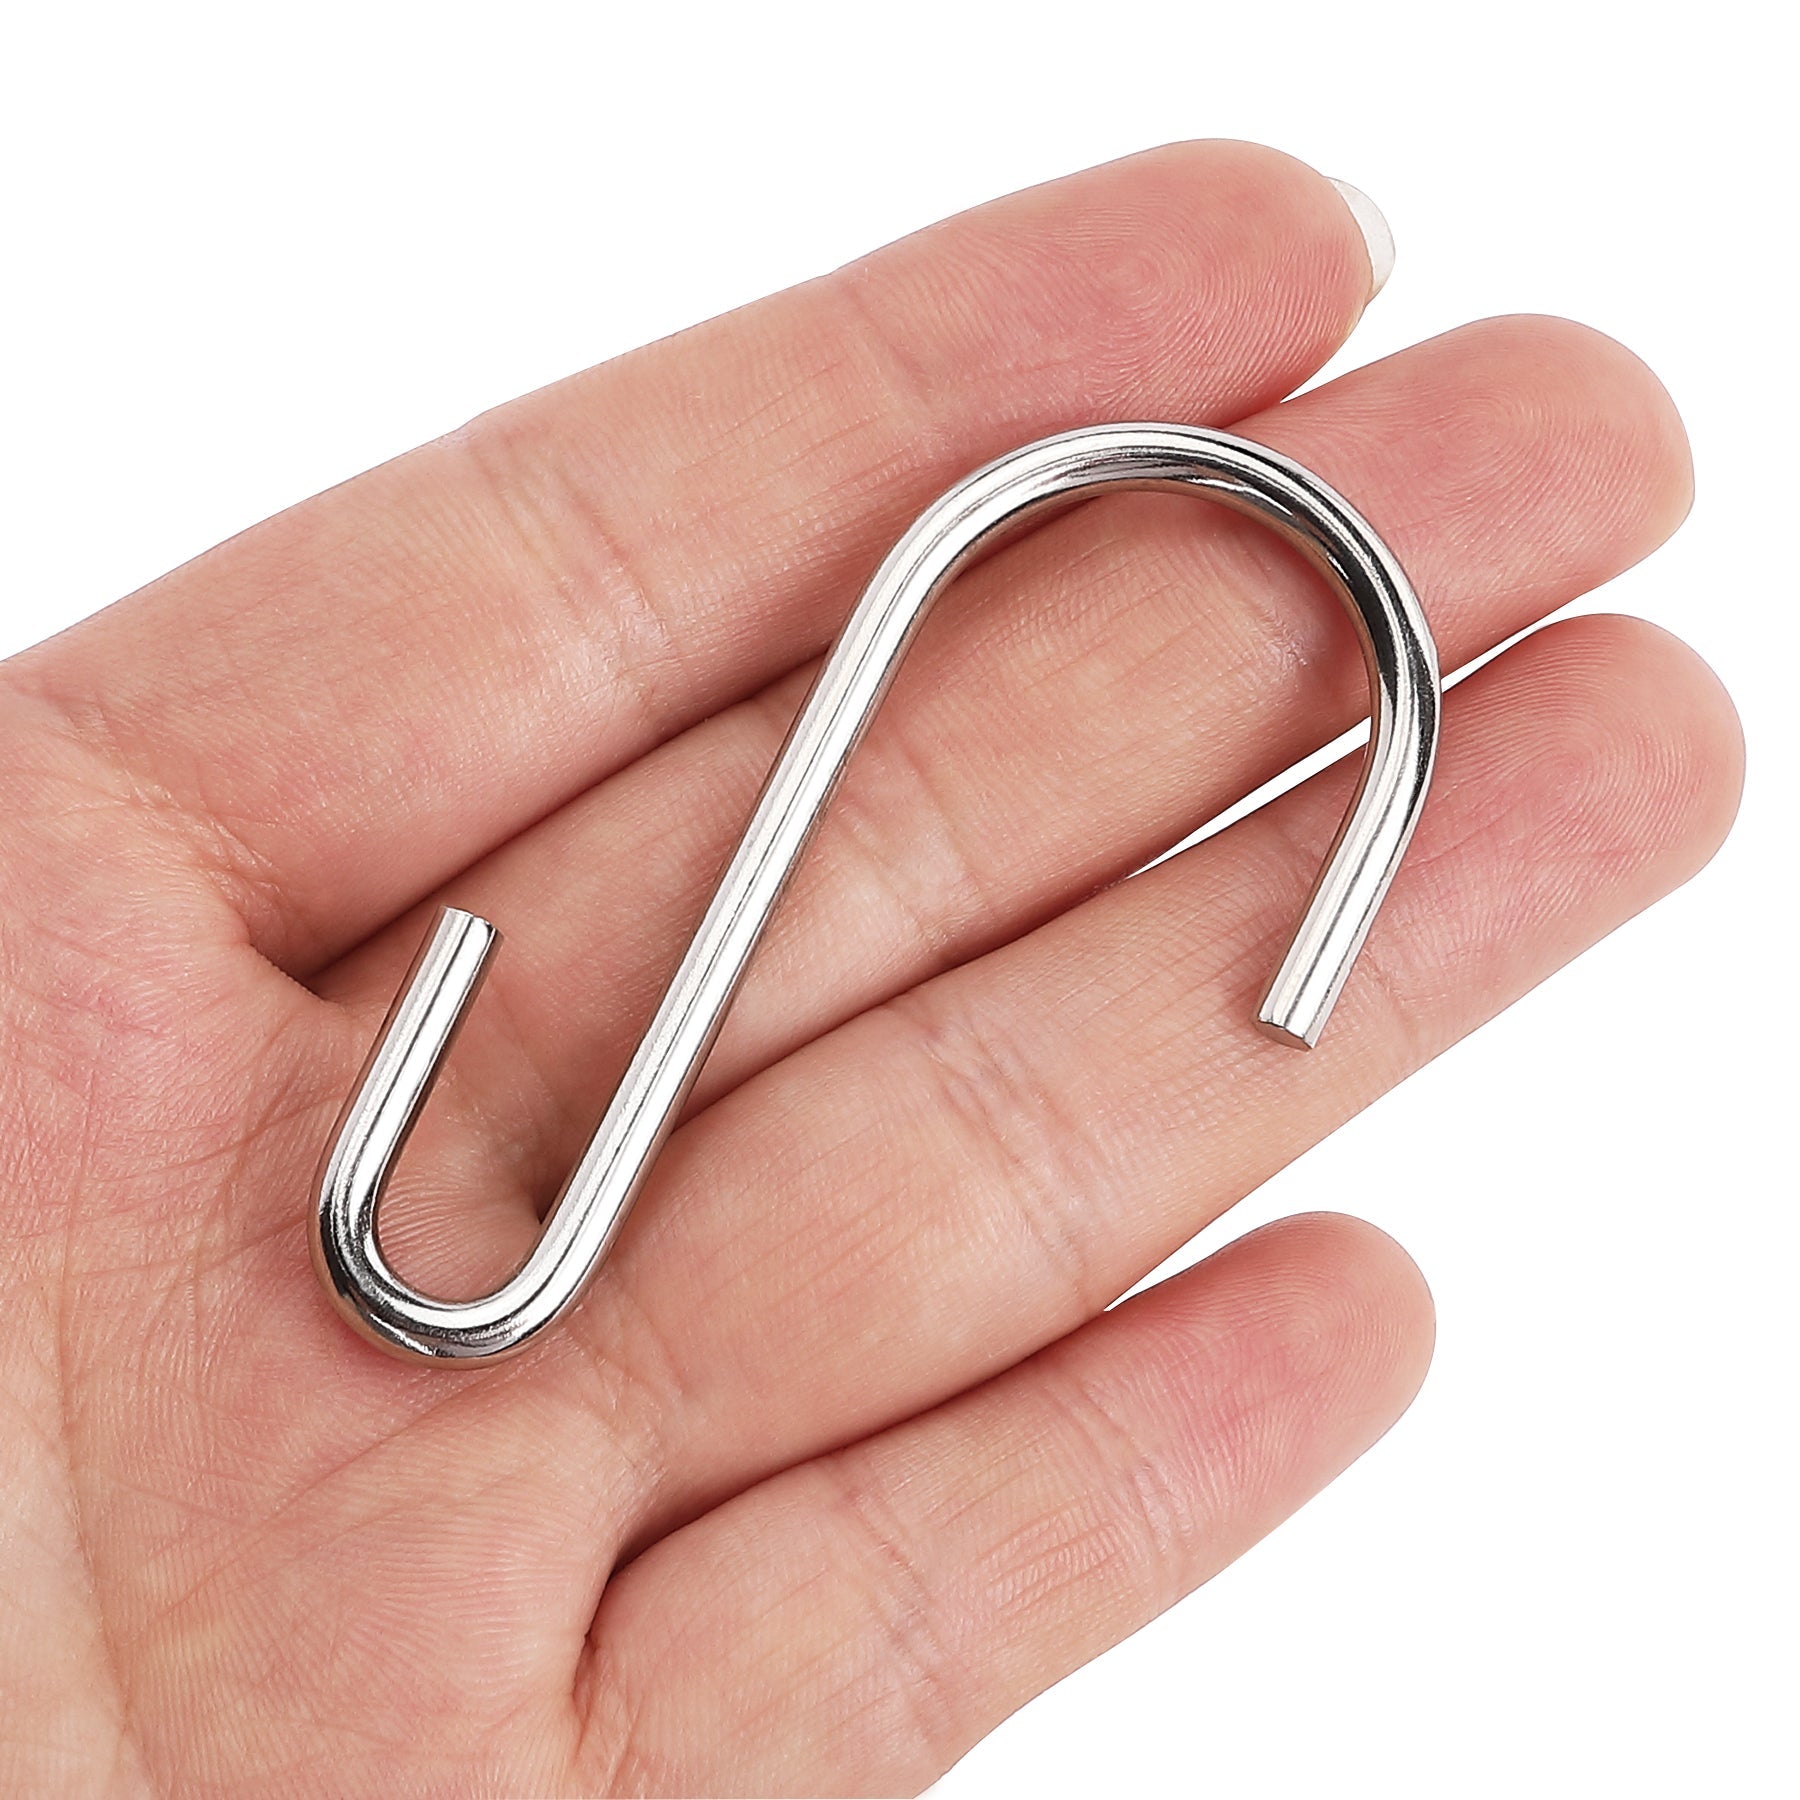 Rivexy 30 Small S Hook Pack - Chrome Coated, S Hooks for Hanging on He